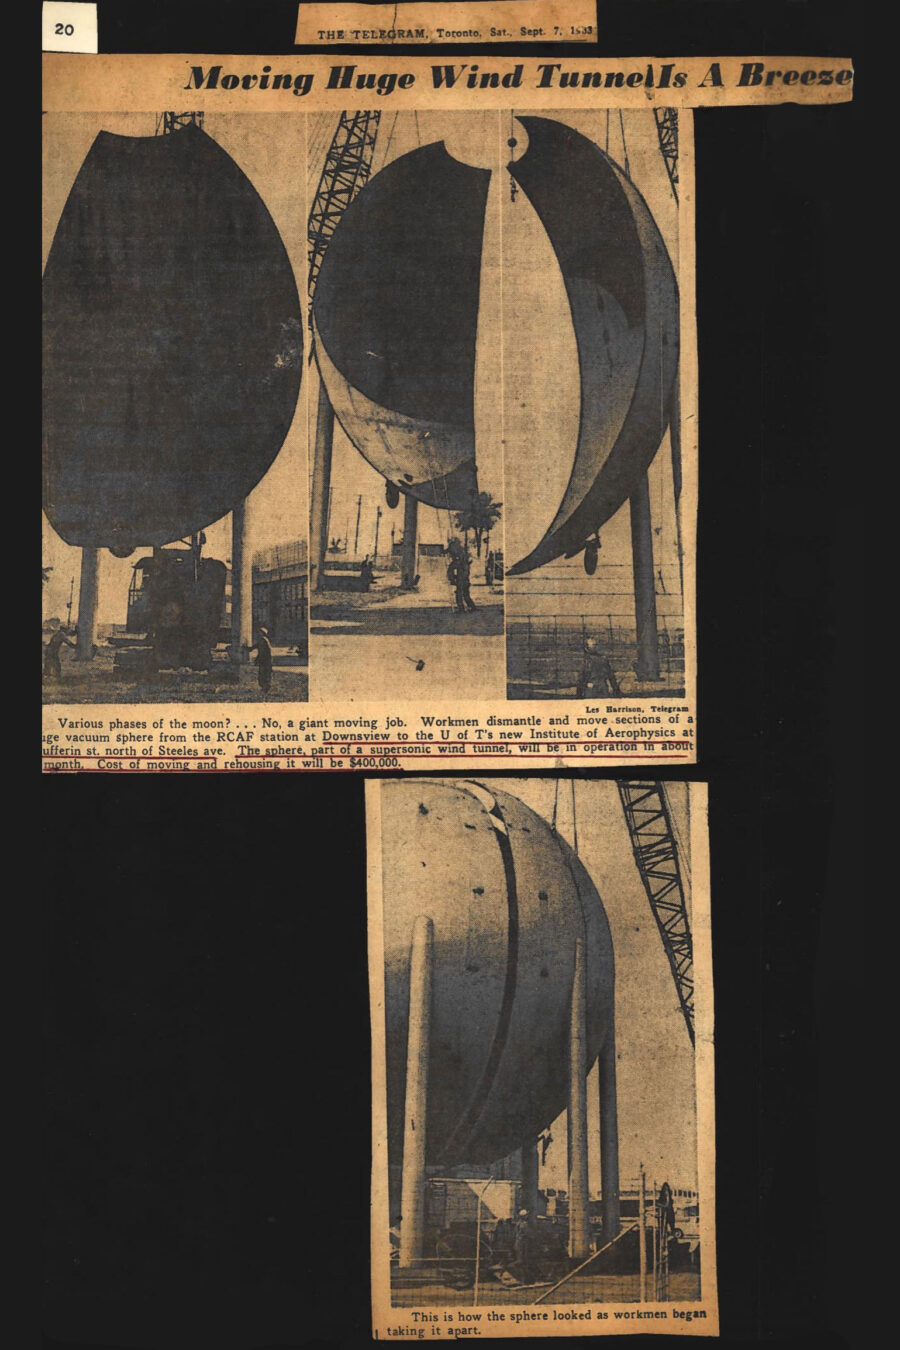 Newspaper clipping from The Telegram, Toronto, September 7, 1963
Headline: Moving Huge Wind Tunnel Is a Breeze

Photo 1 in clipping: Three photos side-by-side show huge sections of the vacuum sphere suspended in the air by a partially obscured construction crane as it is dismantled for transport. Small figures of construction workers are visible beneath the sphere.

Caption: Various phases of the moon? No, a giant moving job. Workmen dismantle and move sections of a huge vacuum sphere from the RCAF station at Downsview to the U of T’s new Institute for Aerospace Studies at Dufferin Street north of Steeles Avenue. The sphere, part of a supersonic wind tunnel, will be in operation in about one month. Cost of moving and rehousing it will be $400,000.

Photo 2 in clipping: Photo of the vacuum sphere mostly intact at the start of the dismantling process, a crane to the side, a worker walking below.

Caption: This is how the sphere looked as workmen began taking it apart.